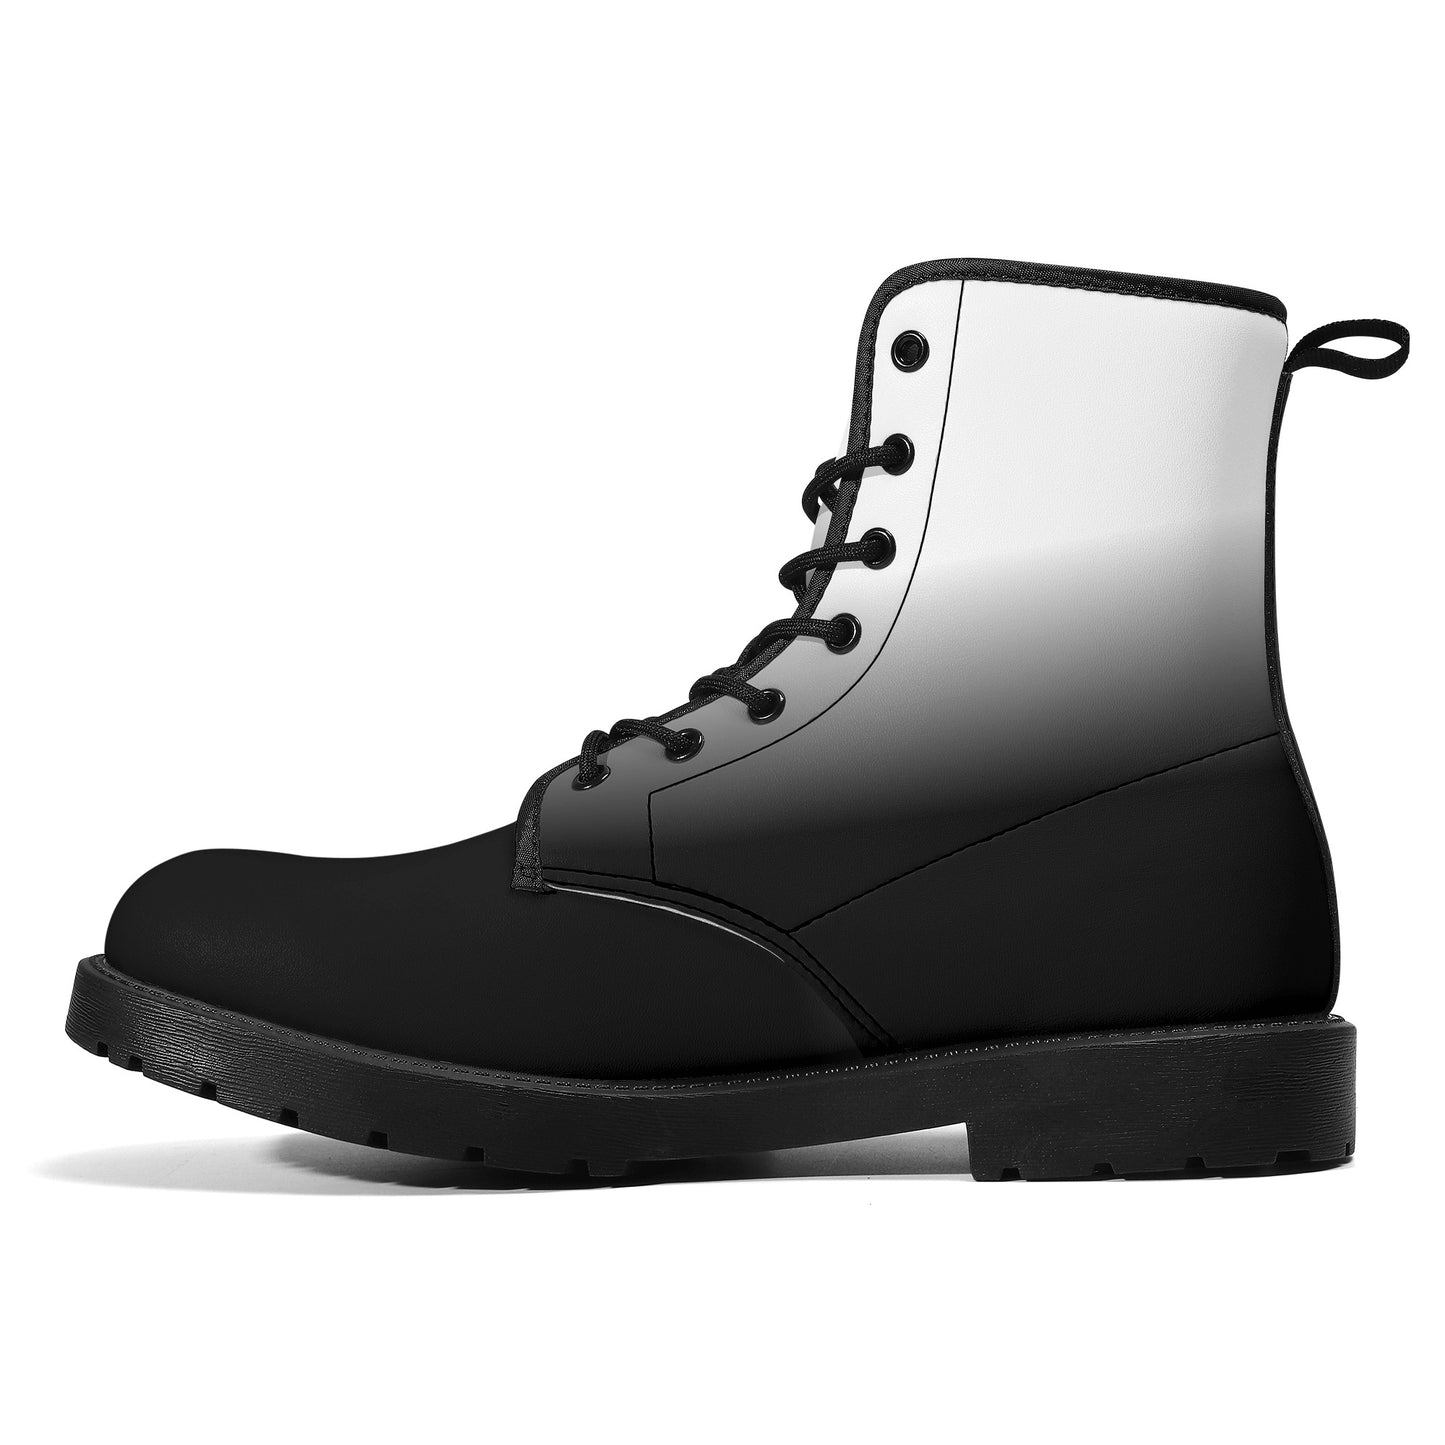 Black White Ombre Men Leather Boots, Tie Dye Gradient Vegan Lace Up Shoes Hiking Festival Black Ankle Combat Work Winter Waterproof Custom Starcove Fashion